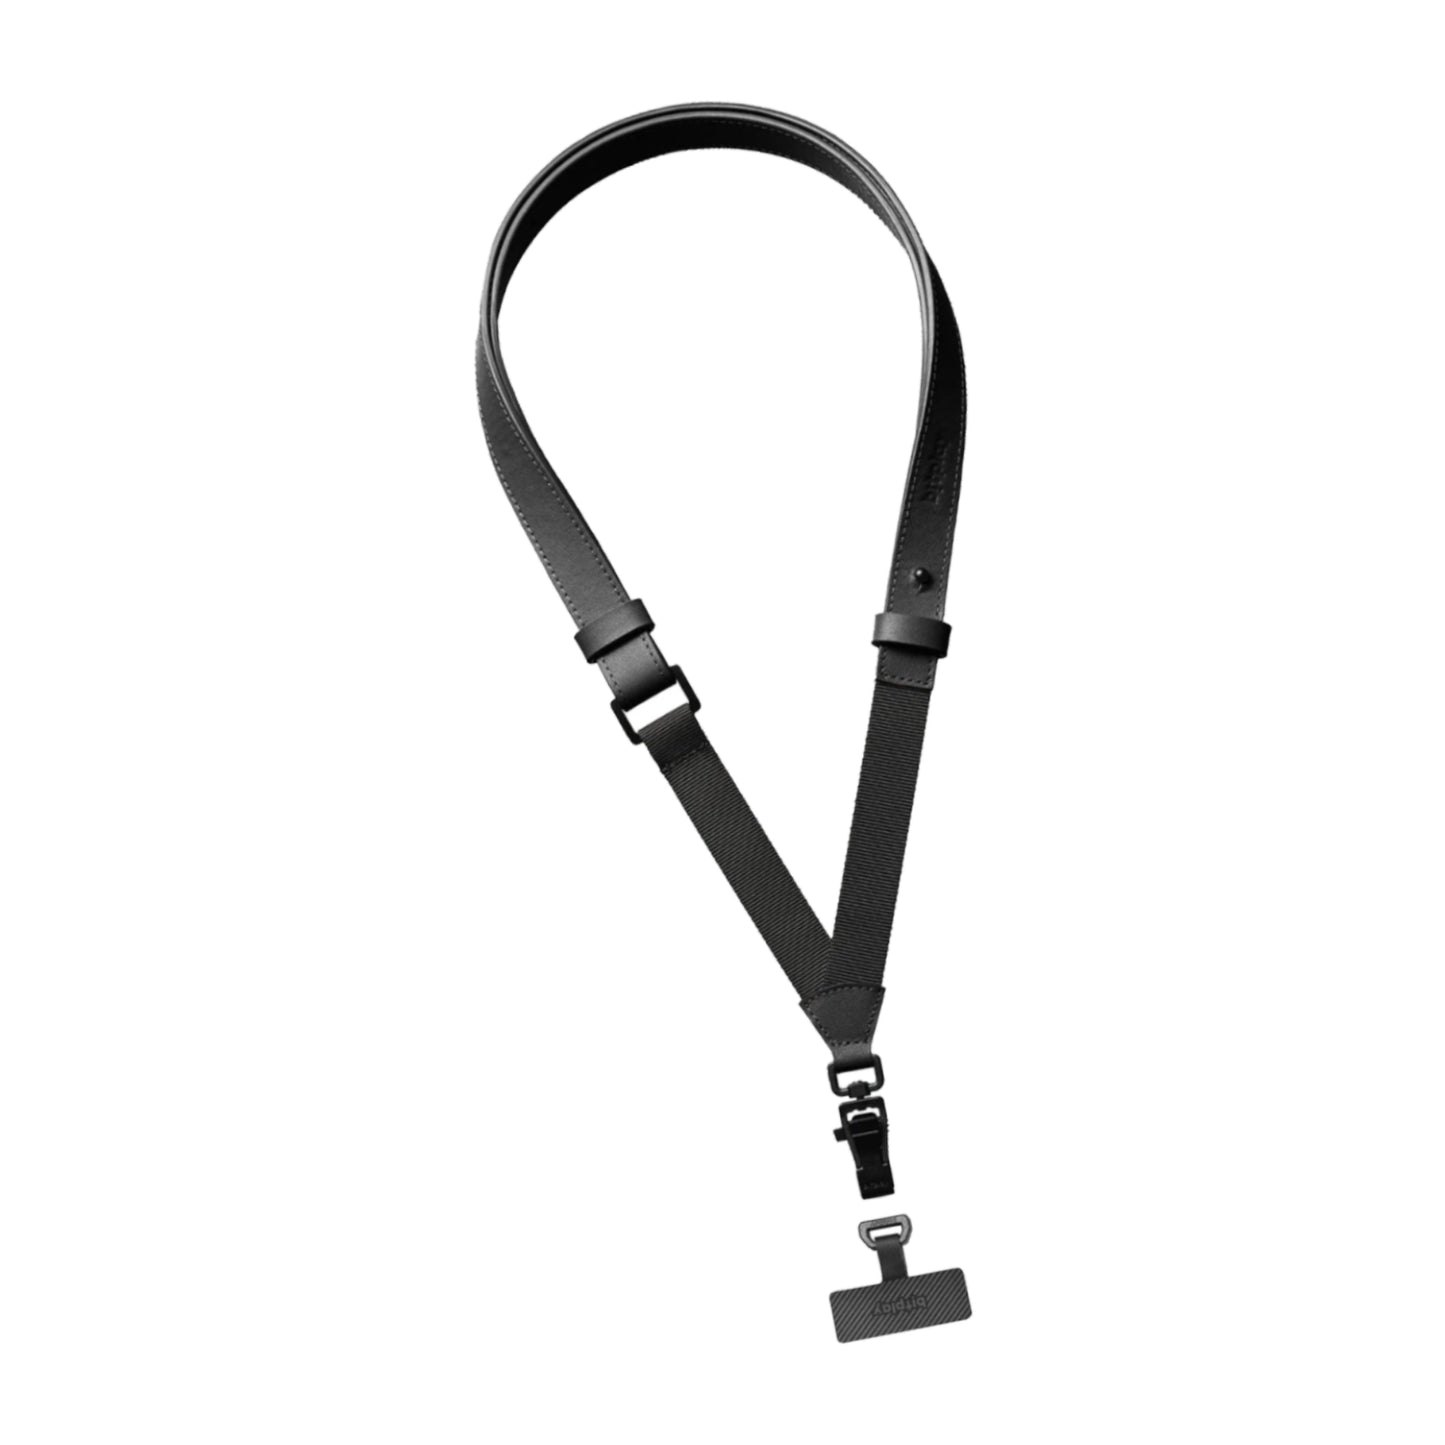 Bitplay Genuine Leather Strap 20mm Lanyard - Strap Adapter Included